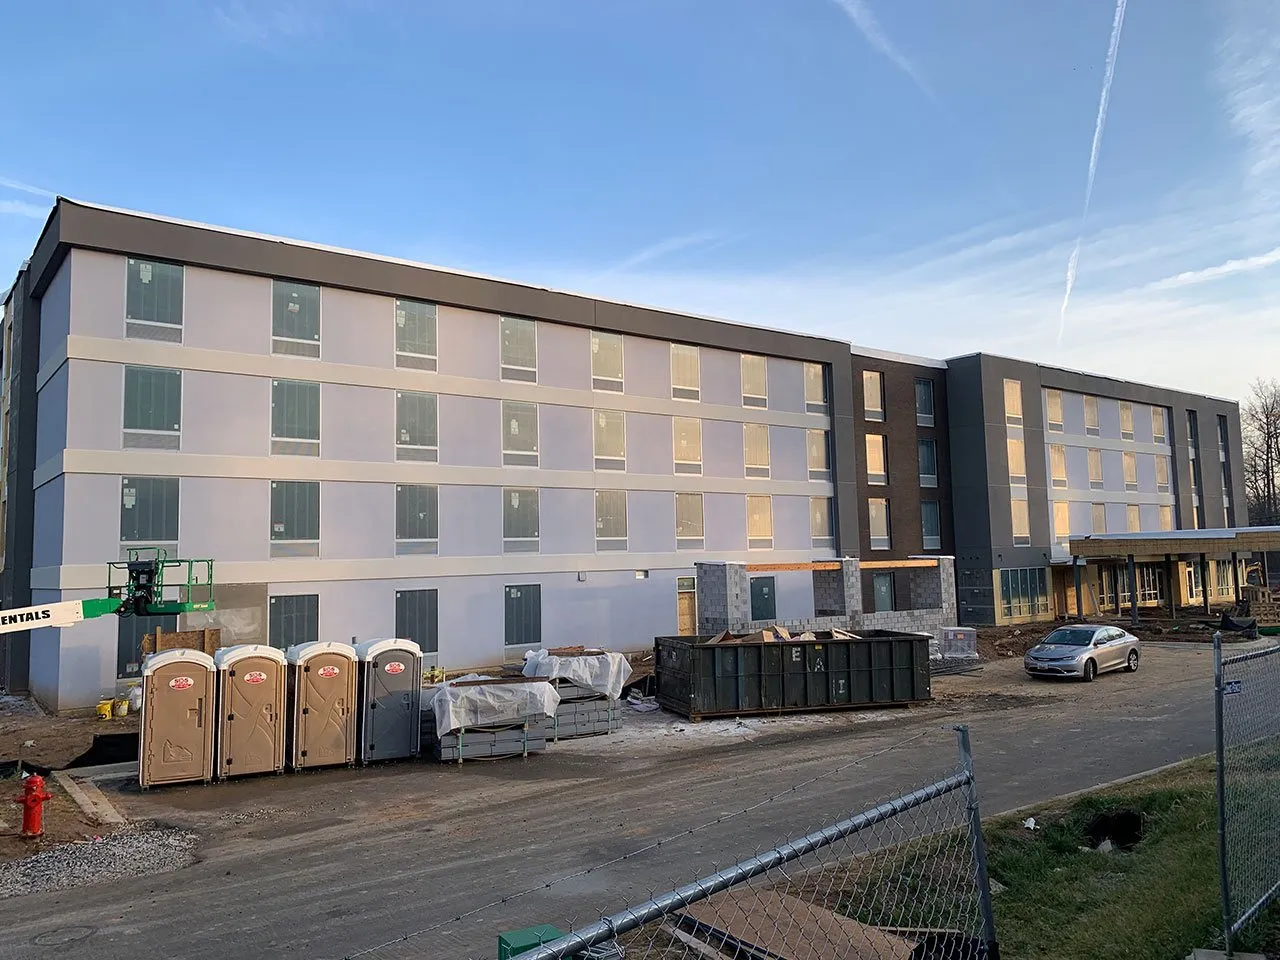 Home2 Suites Owings Mills MD exterior finished